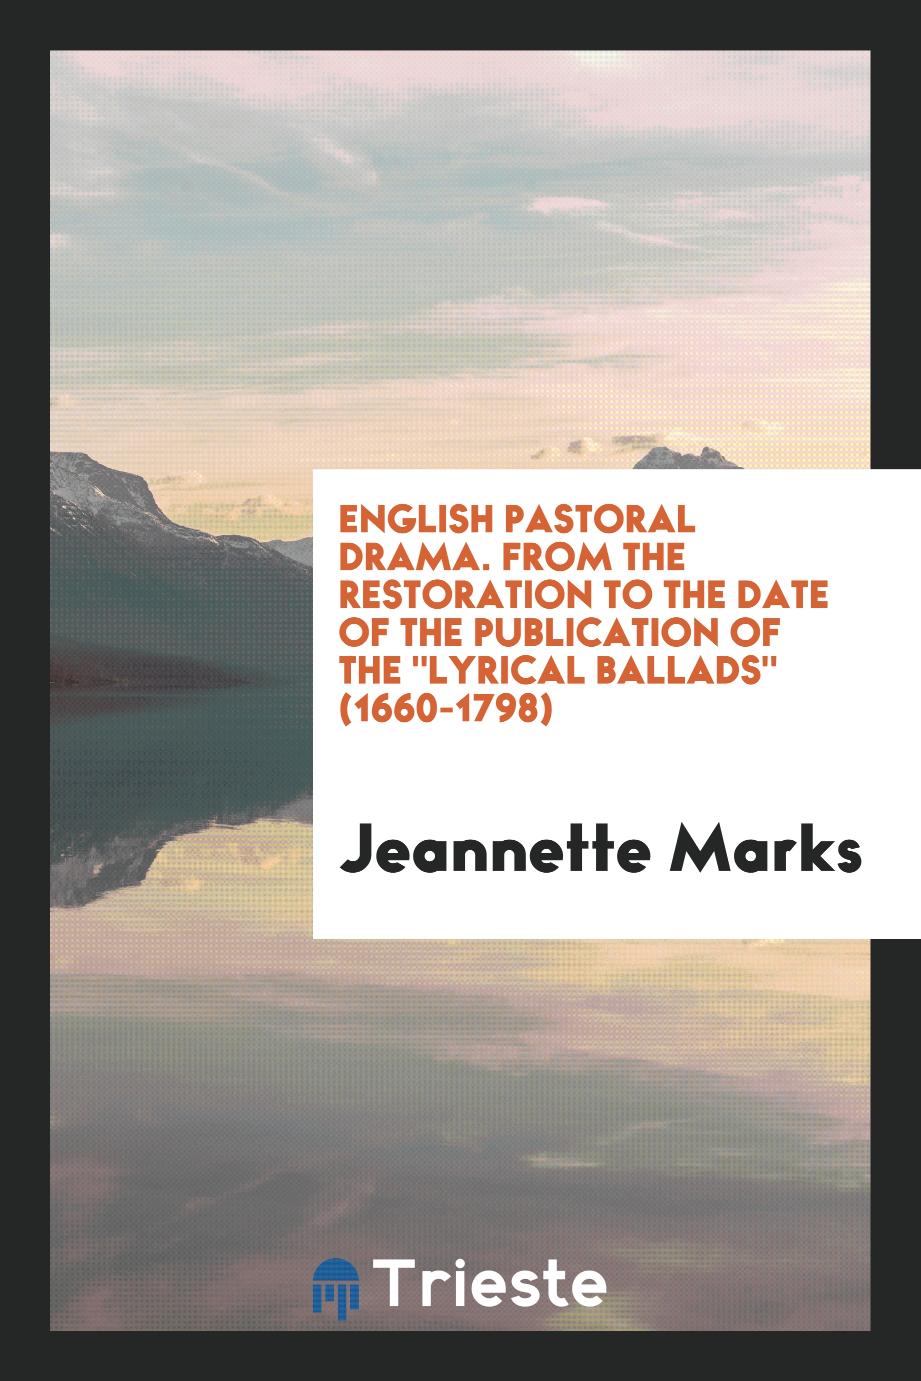 English Pastoral Drama. From the Restoration to the Date of the Publication of The "Lyrical Ballads" (1660-1798)